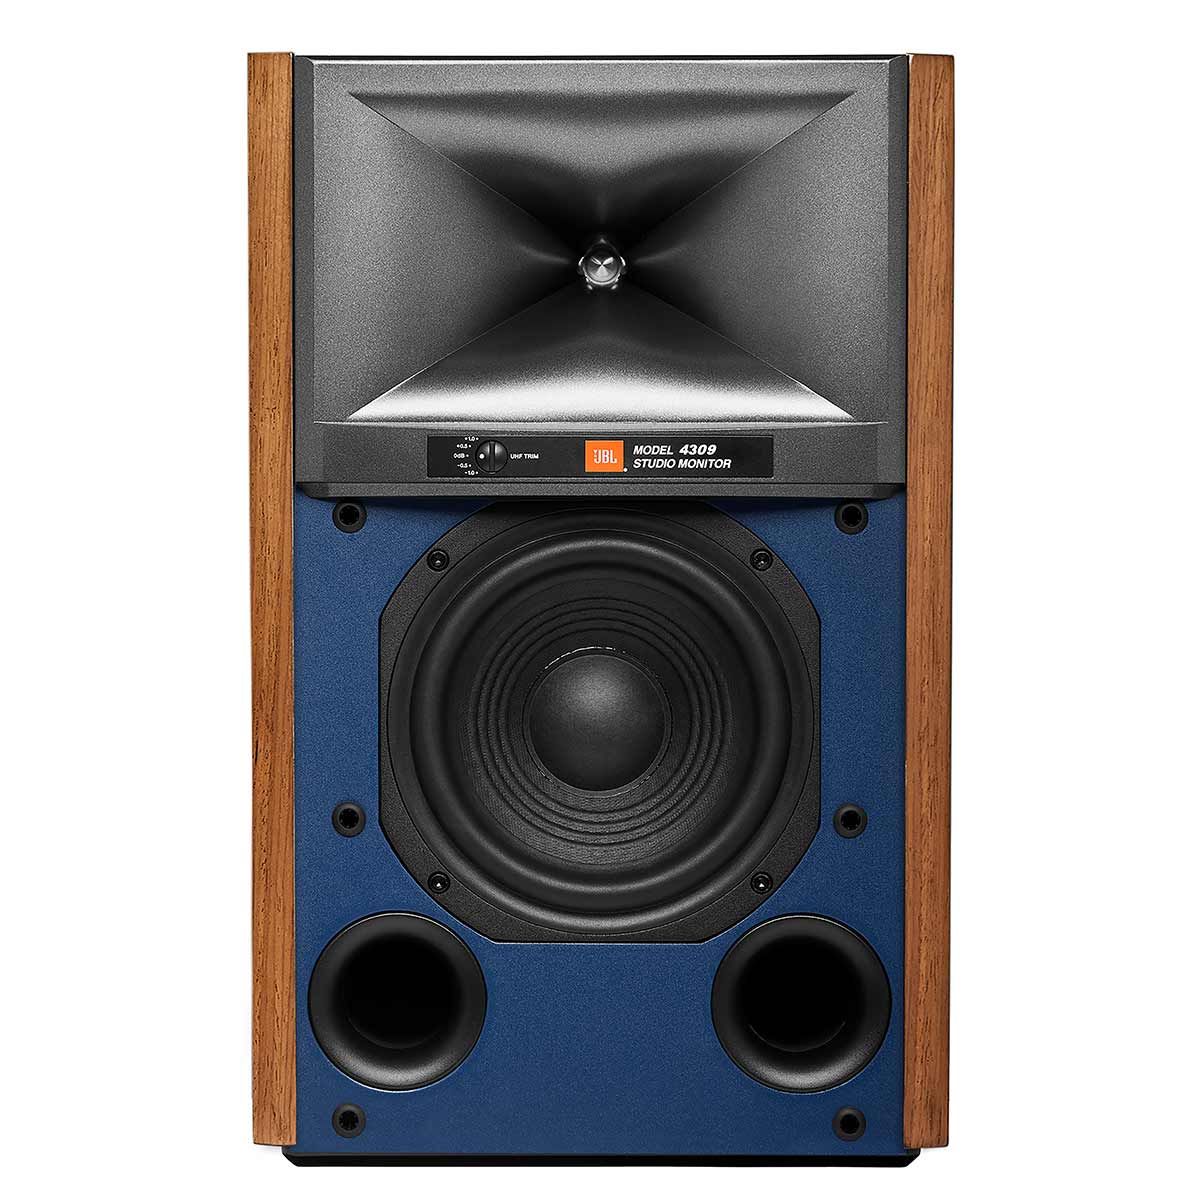 JBL Synthesis 4309 Bookshelf Speakers, Walnut, front view without grille